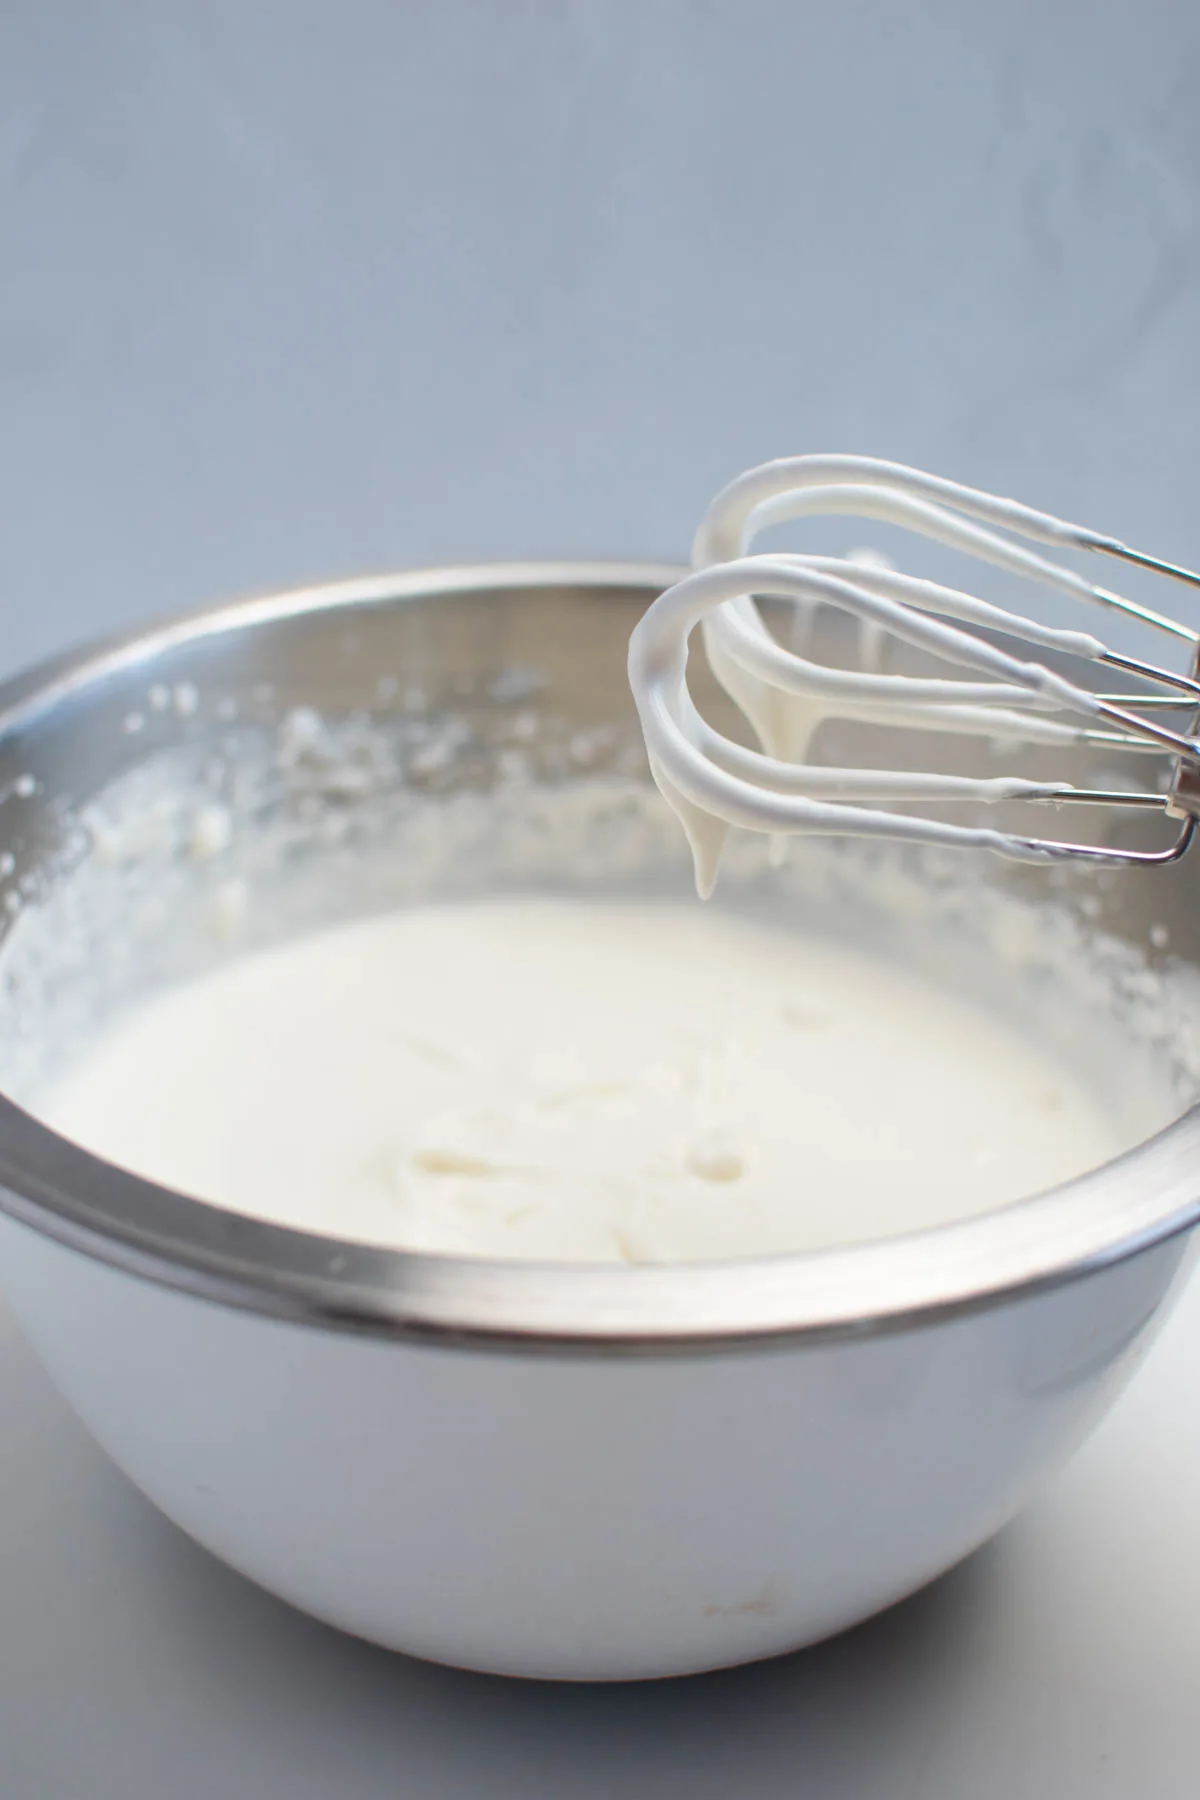 Electric beaters with soft peaks of whipped cream sit over metal mixing bowl.